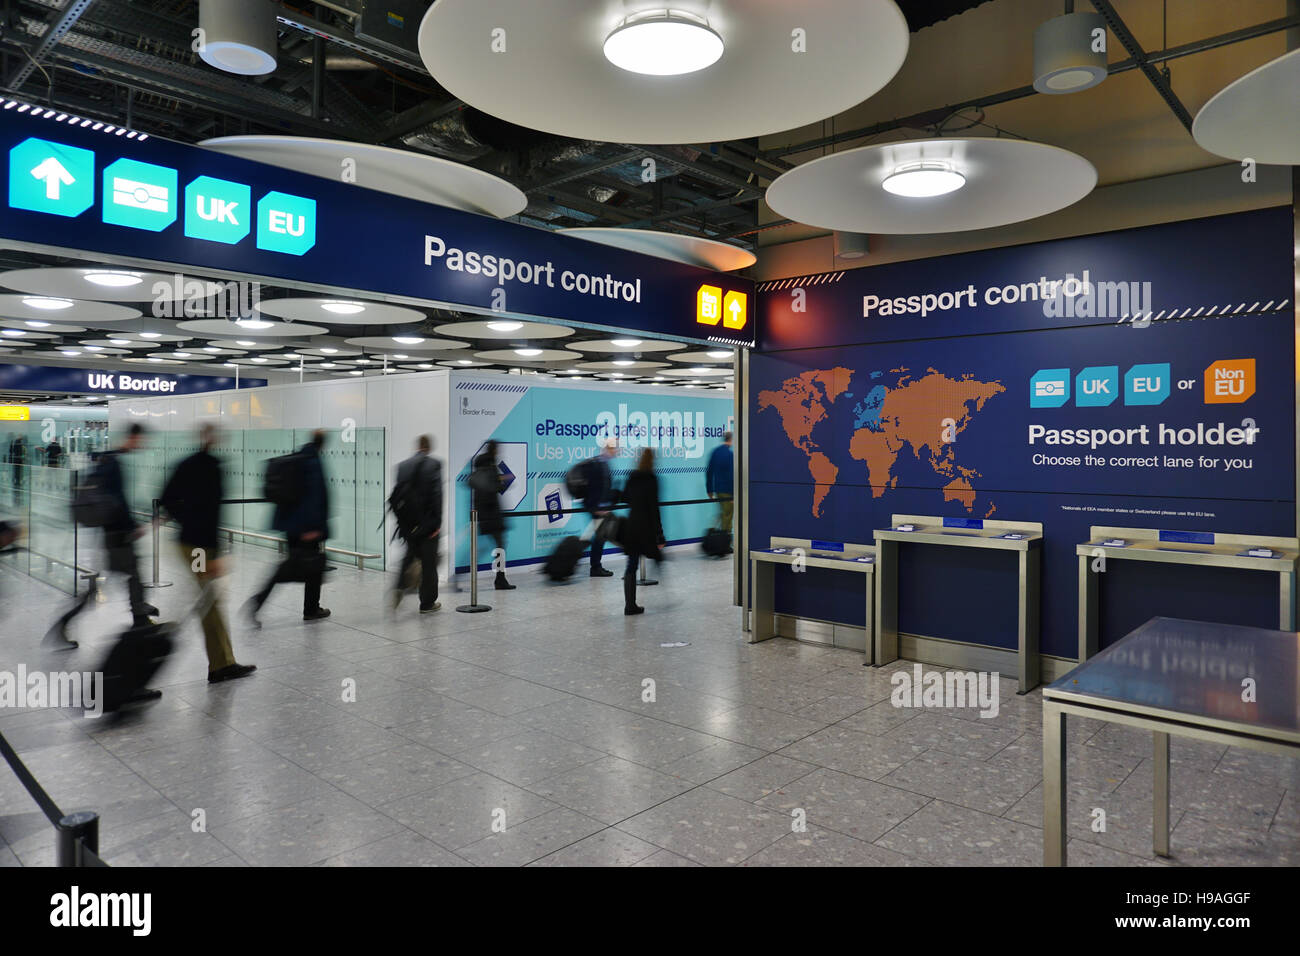 The UK and European separate passport control and immigration lanes at London Heathrow International Airport (LHR) Stock Photo